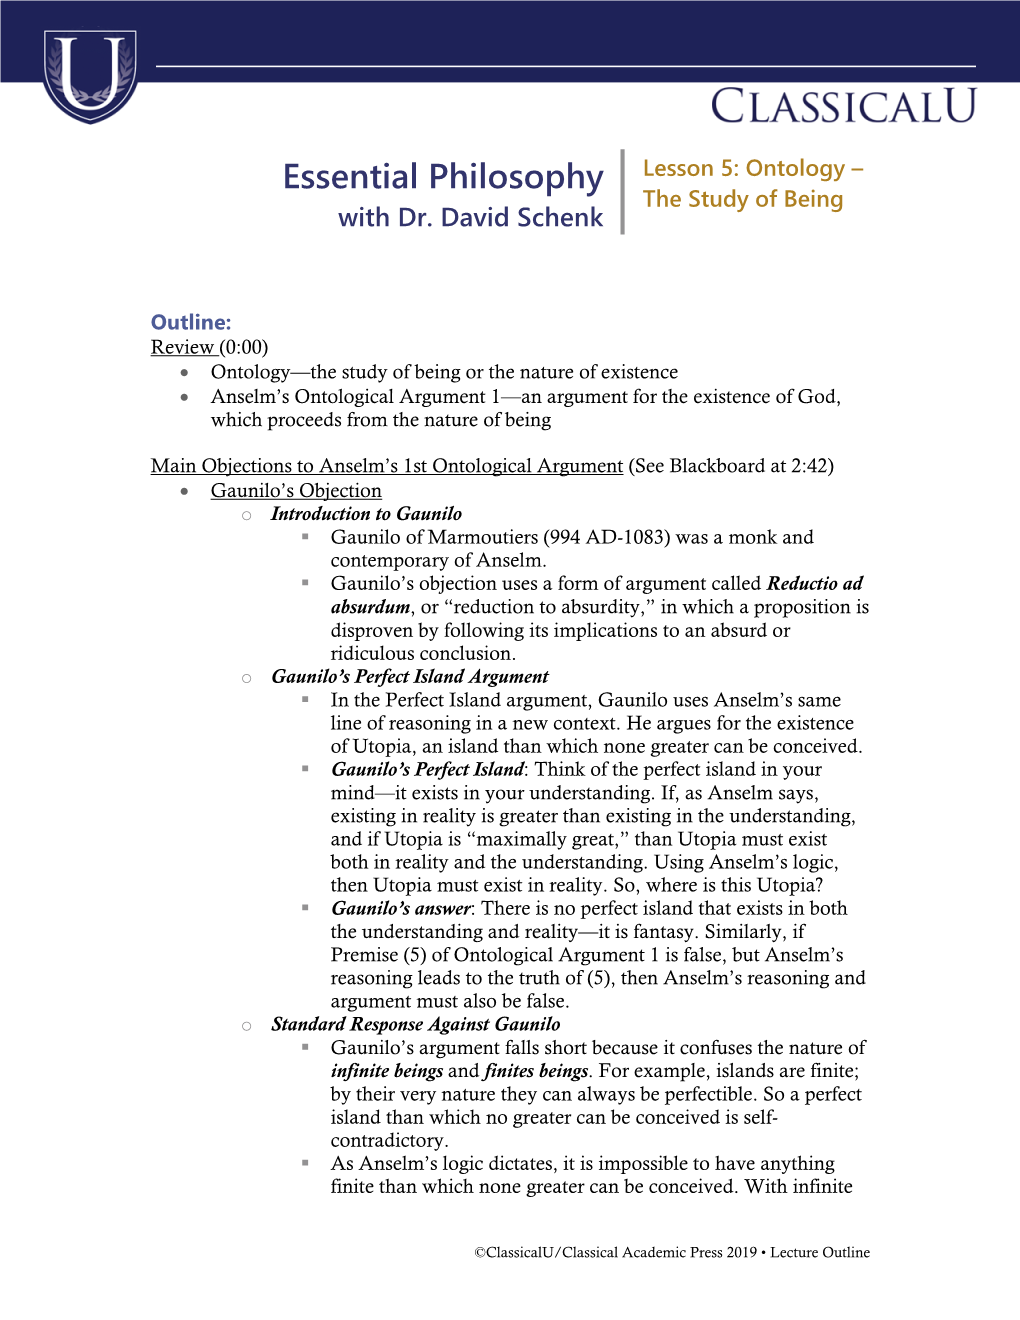 Essential Philosophy Lesson 5: Ontology – the Study of Being with Dr